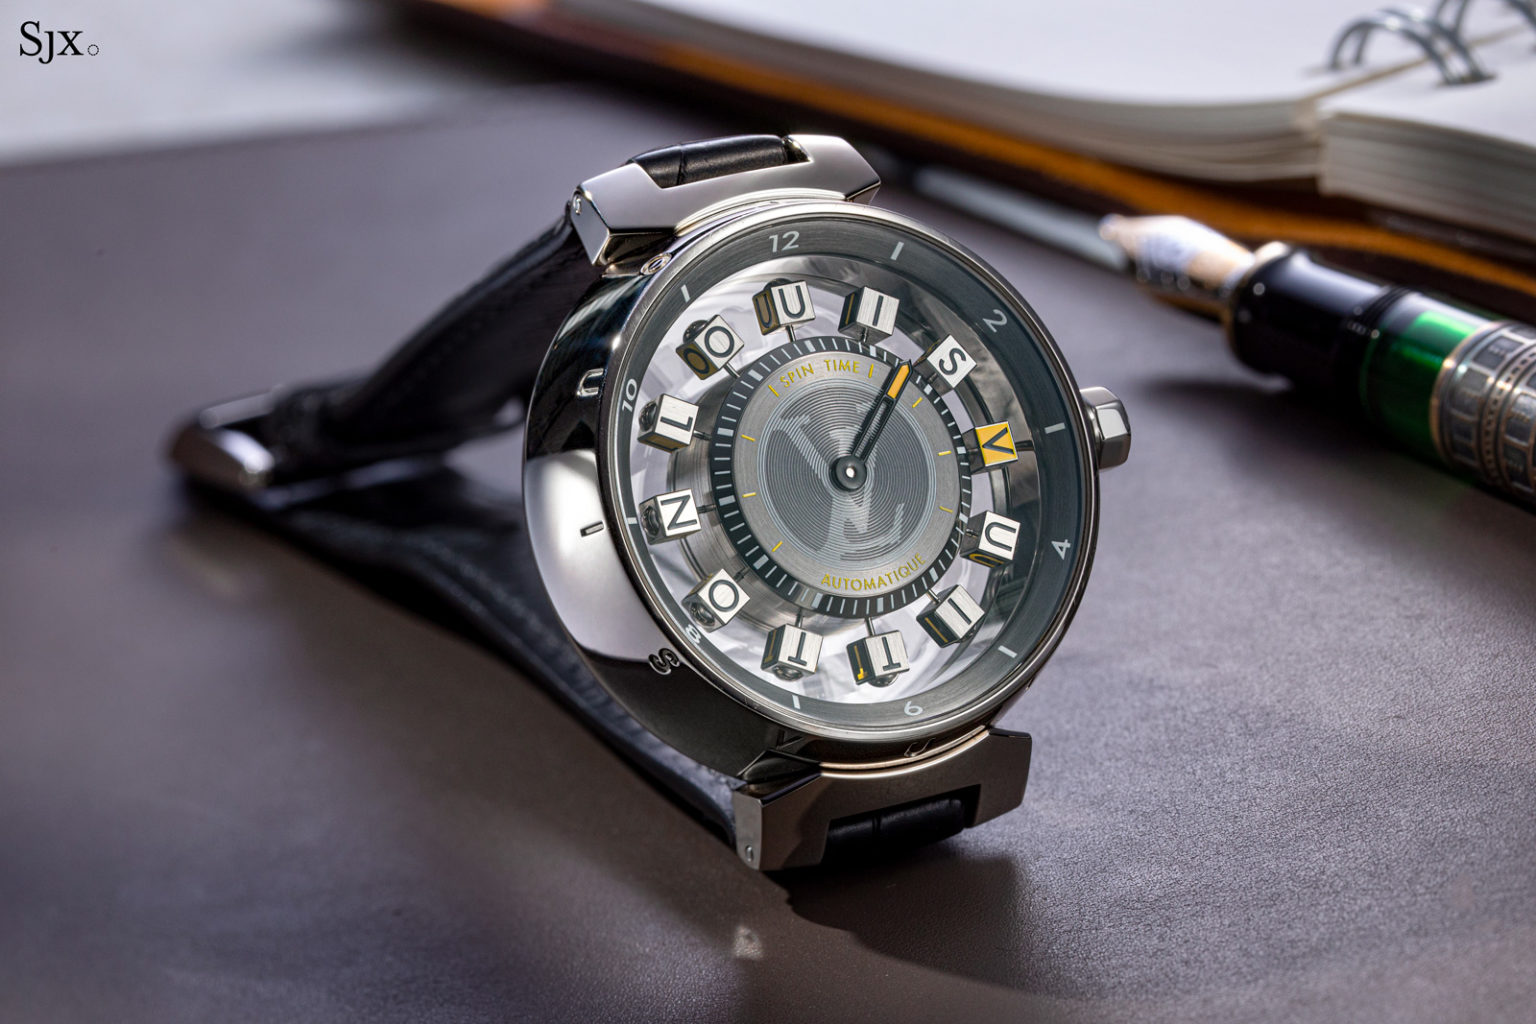 In Depth: Louis Vuitton Tambour Spin Time Air | SJX Watches